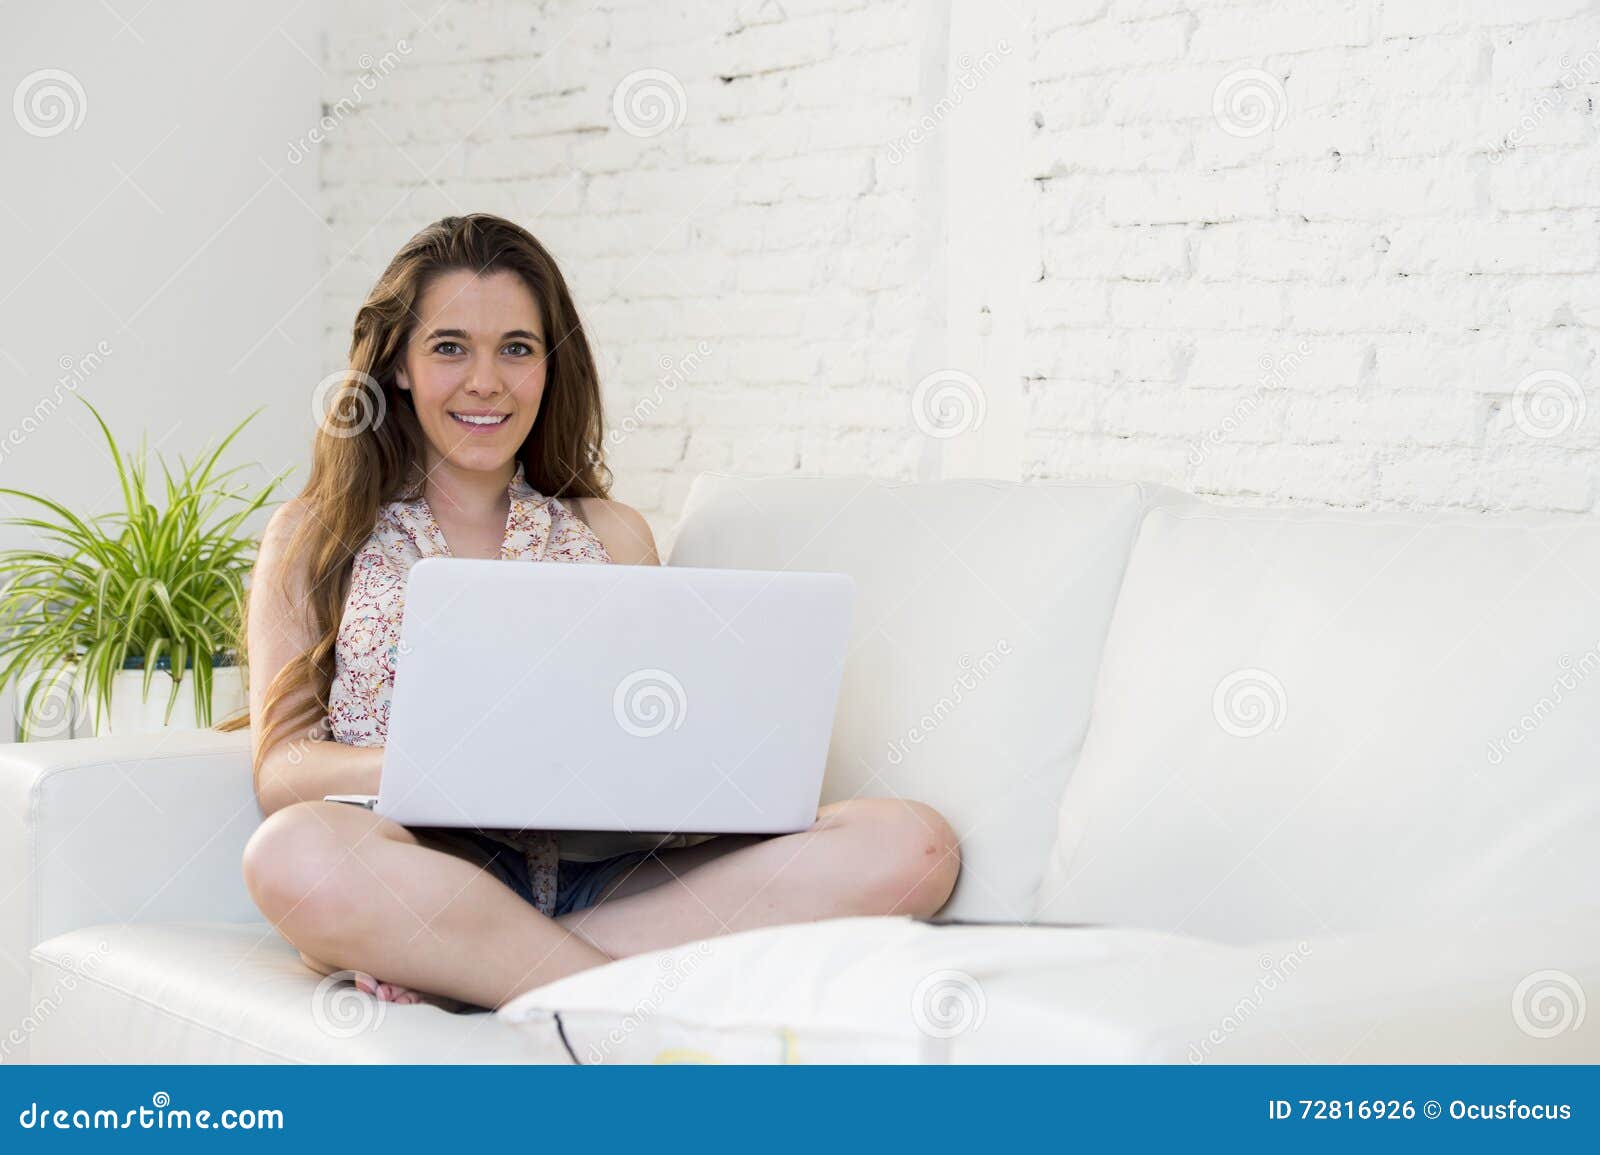 Young Beautiful Woman Working with Laptop Computer Smiling Happy or ...